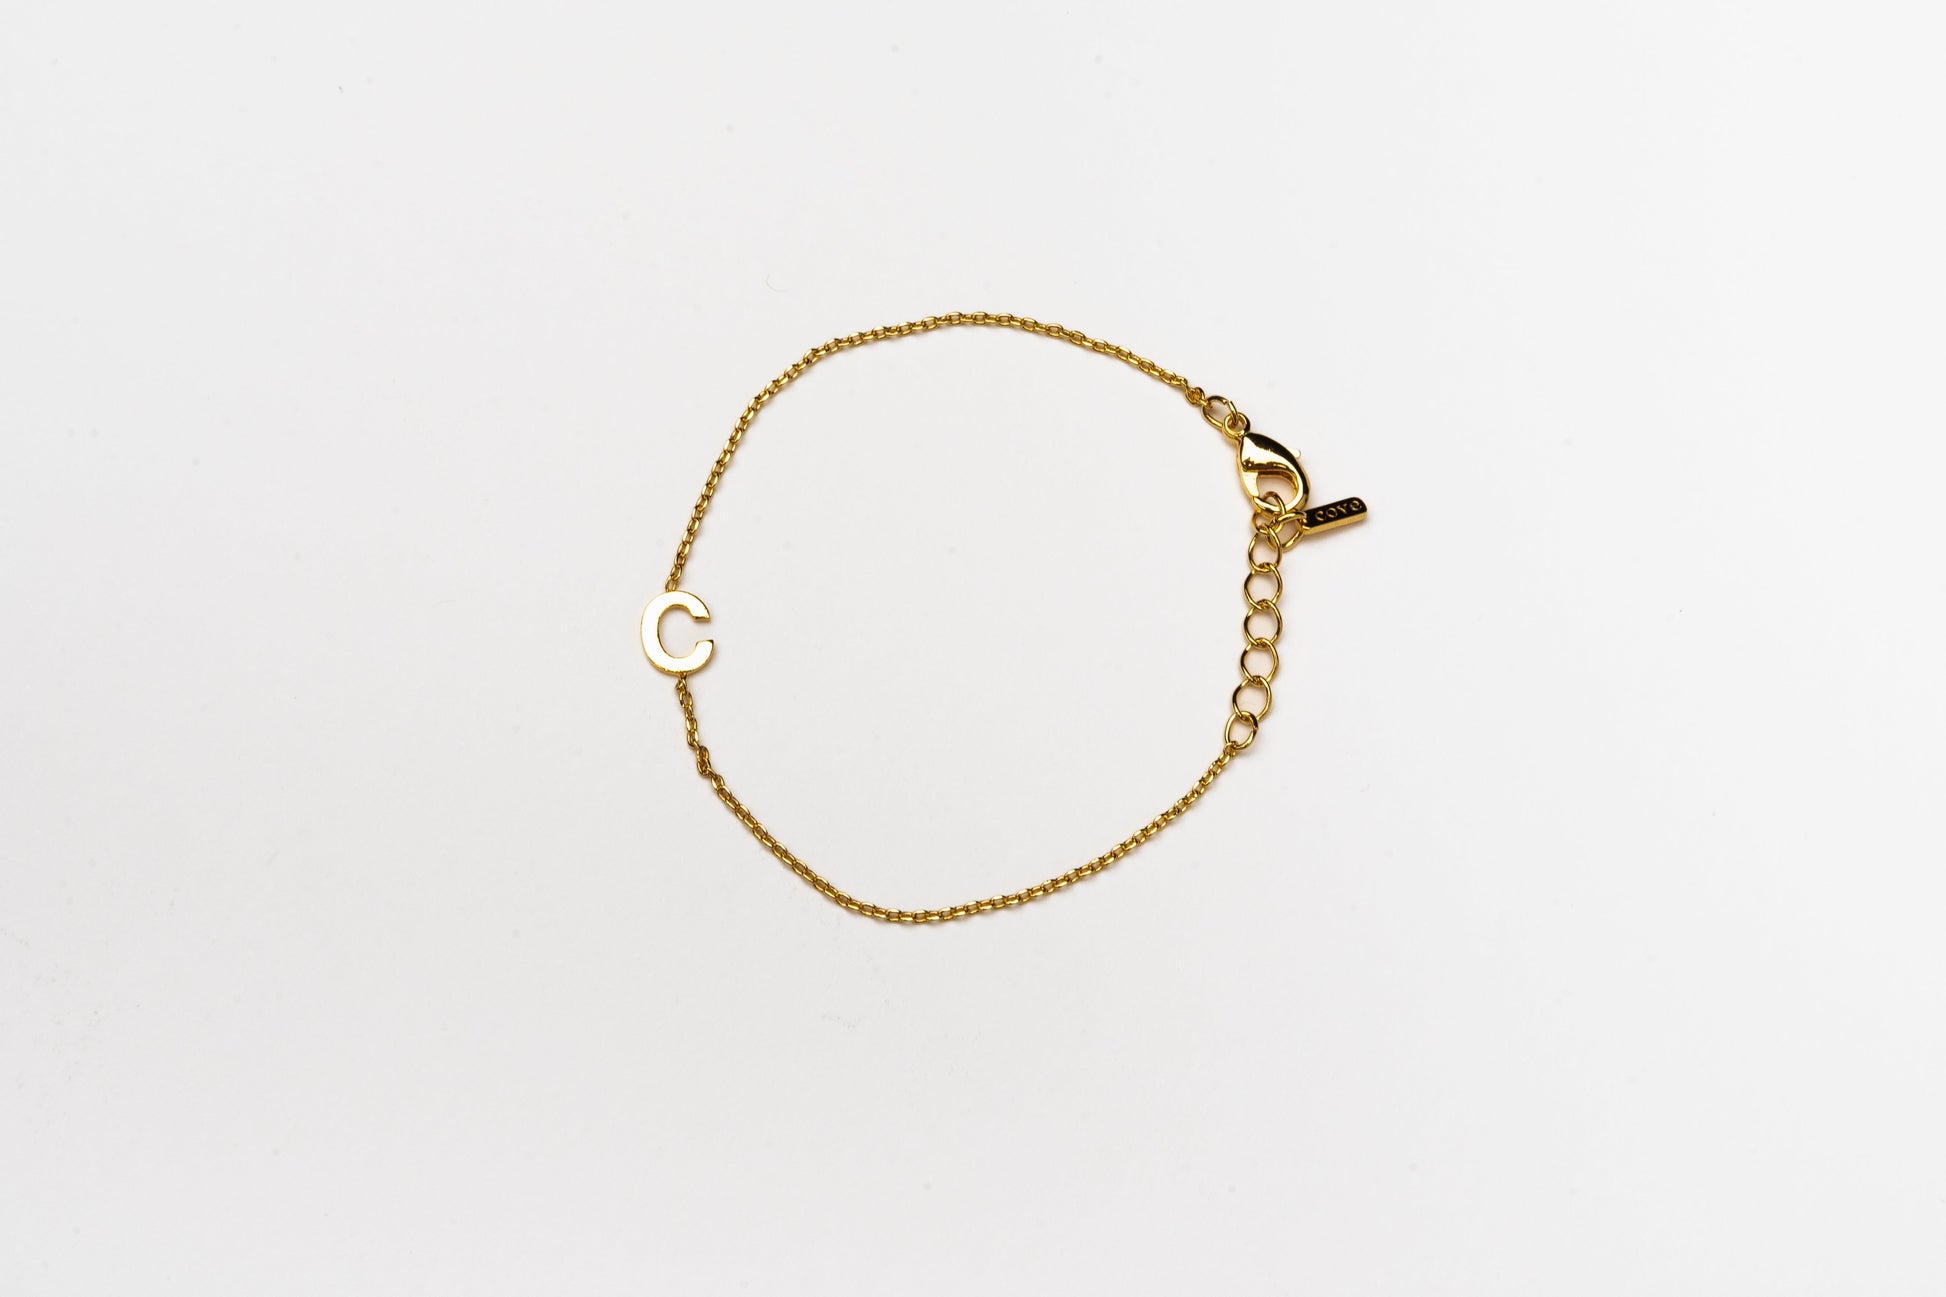 Cove Kid's Initial Bracelet KID'S BRACELET Cove Accessories 18k Gold Plated 1-4 Year/5" + 1/2" ext C